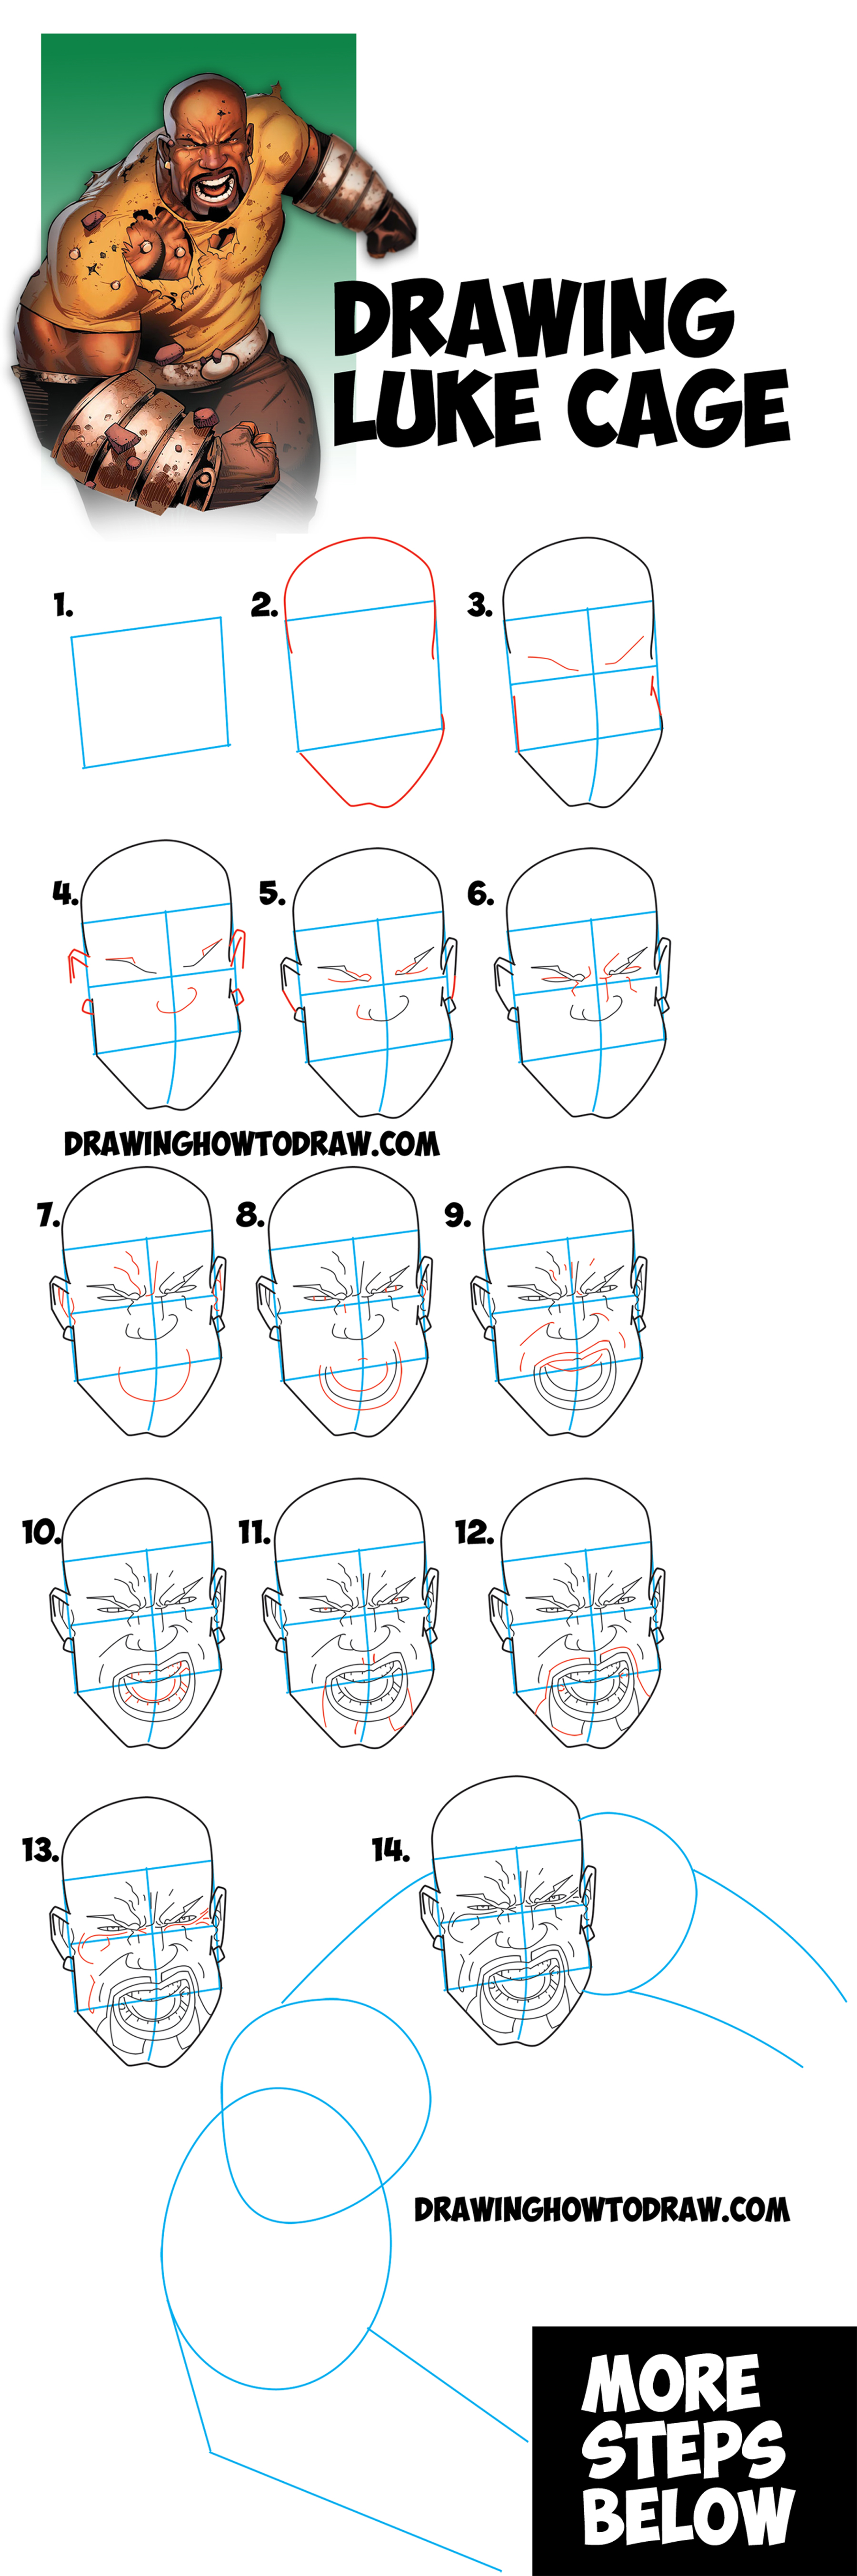 How to Draw Luke Cage from Marvel and Netflix's Luke Cage Series in Comics Style - Step by Step Drawing Tutorial